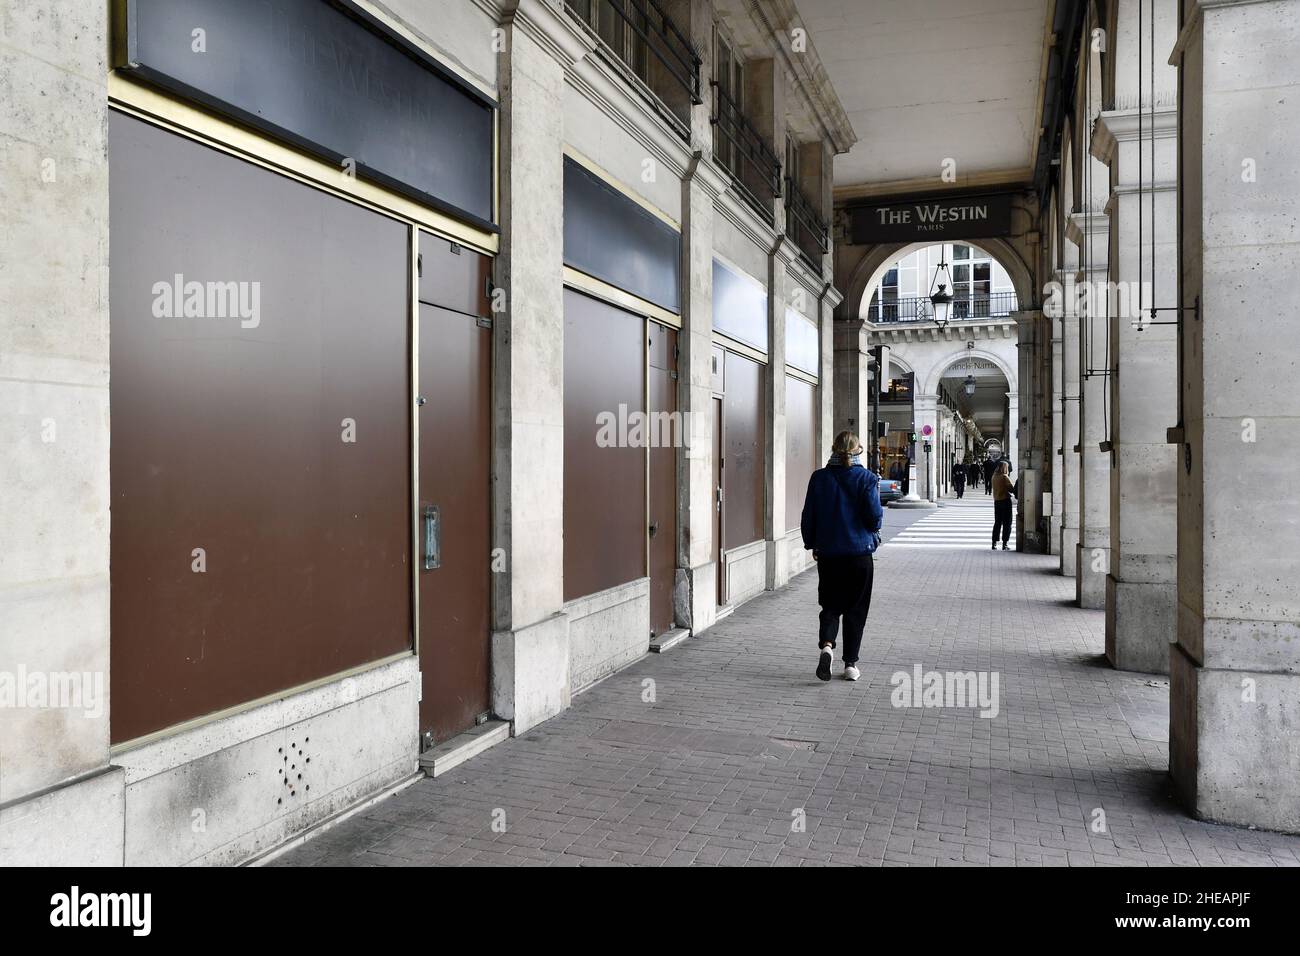 Shops closed by COVID Crisis and traffic difficulties of circulation - Rue de Rivoli - Paris - France Stock Photo